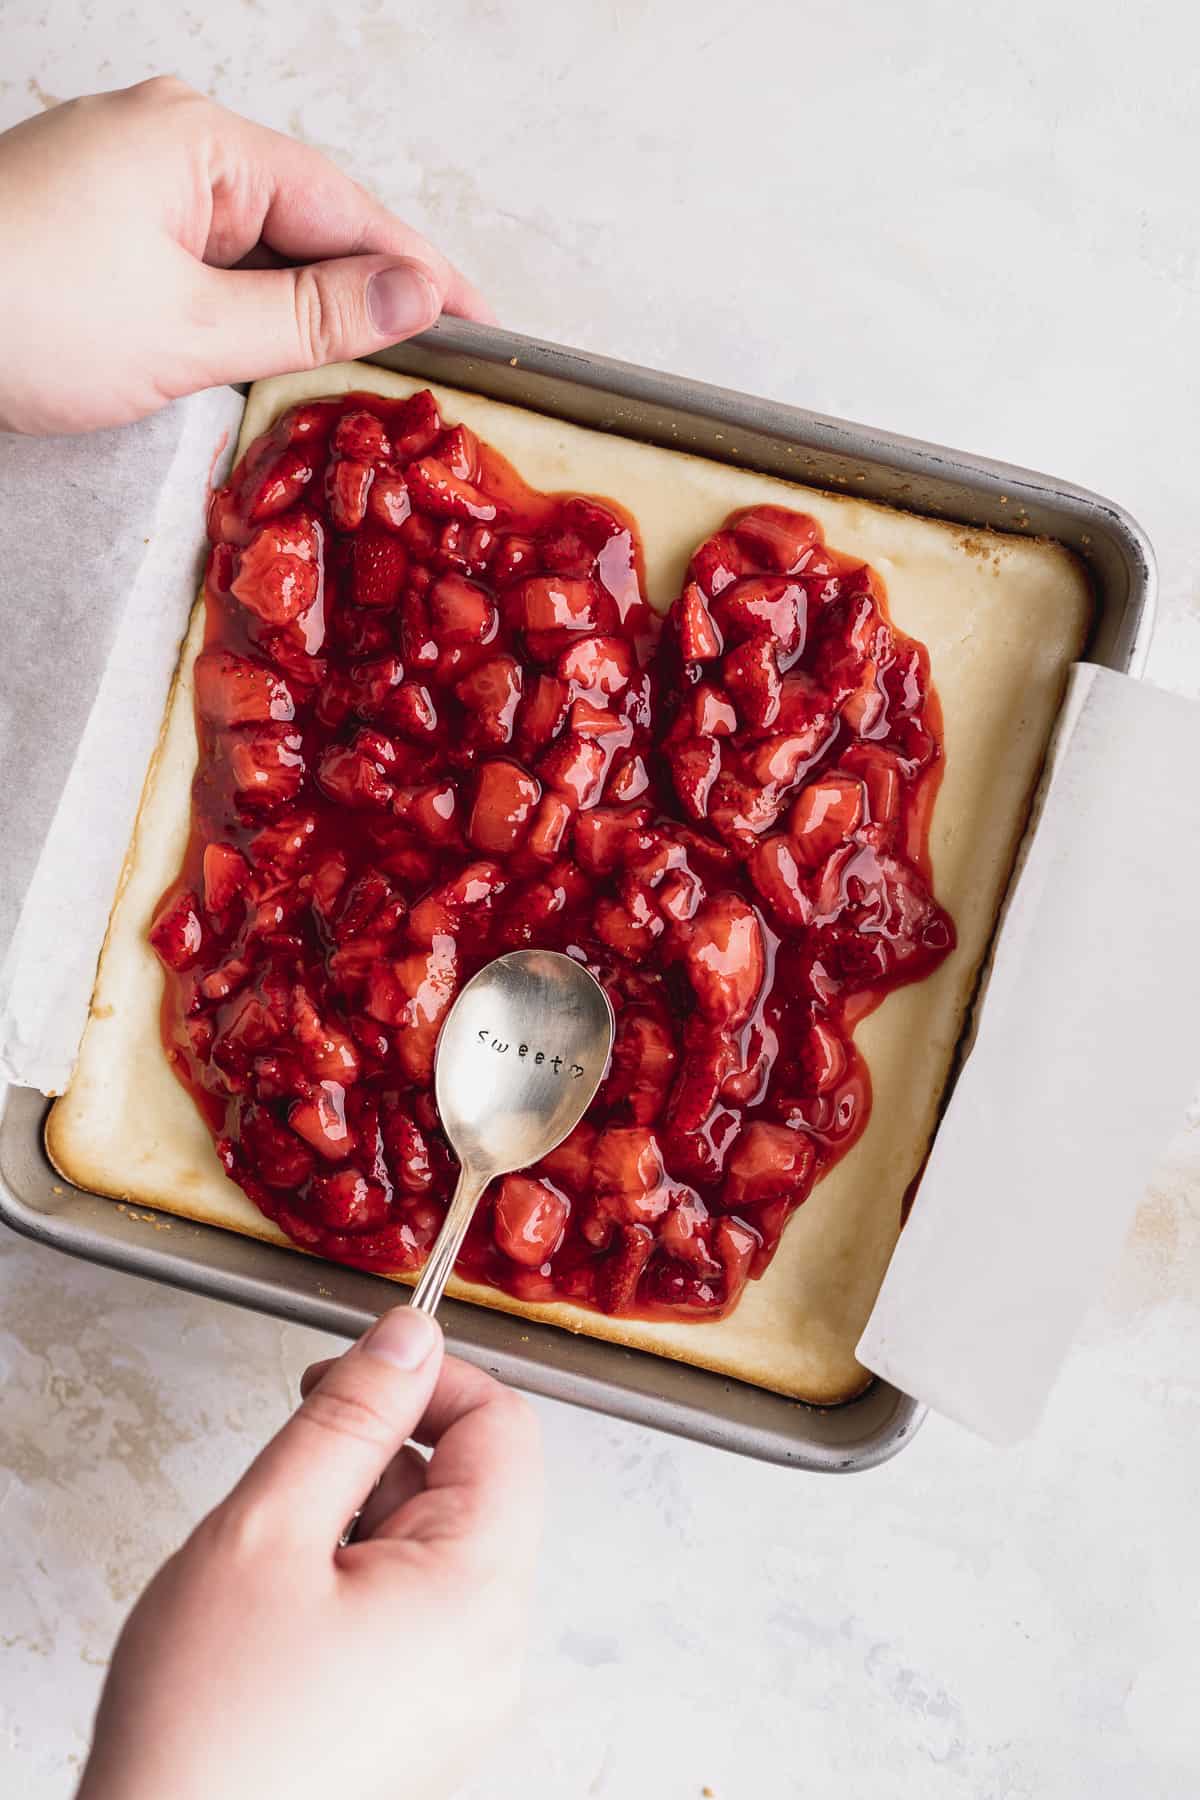 Spreading strawberry sauce on top of baked cheesecake.